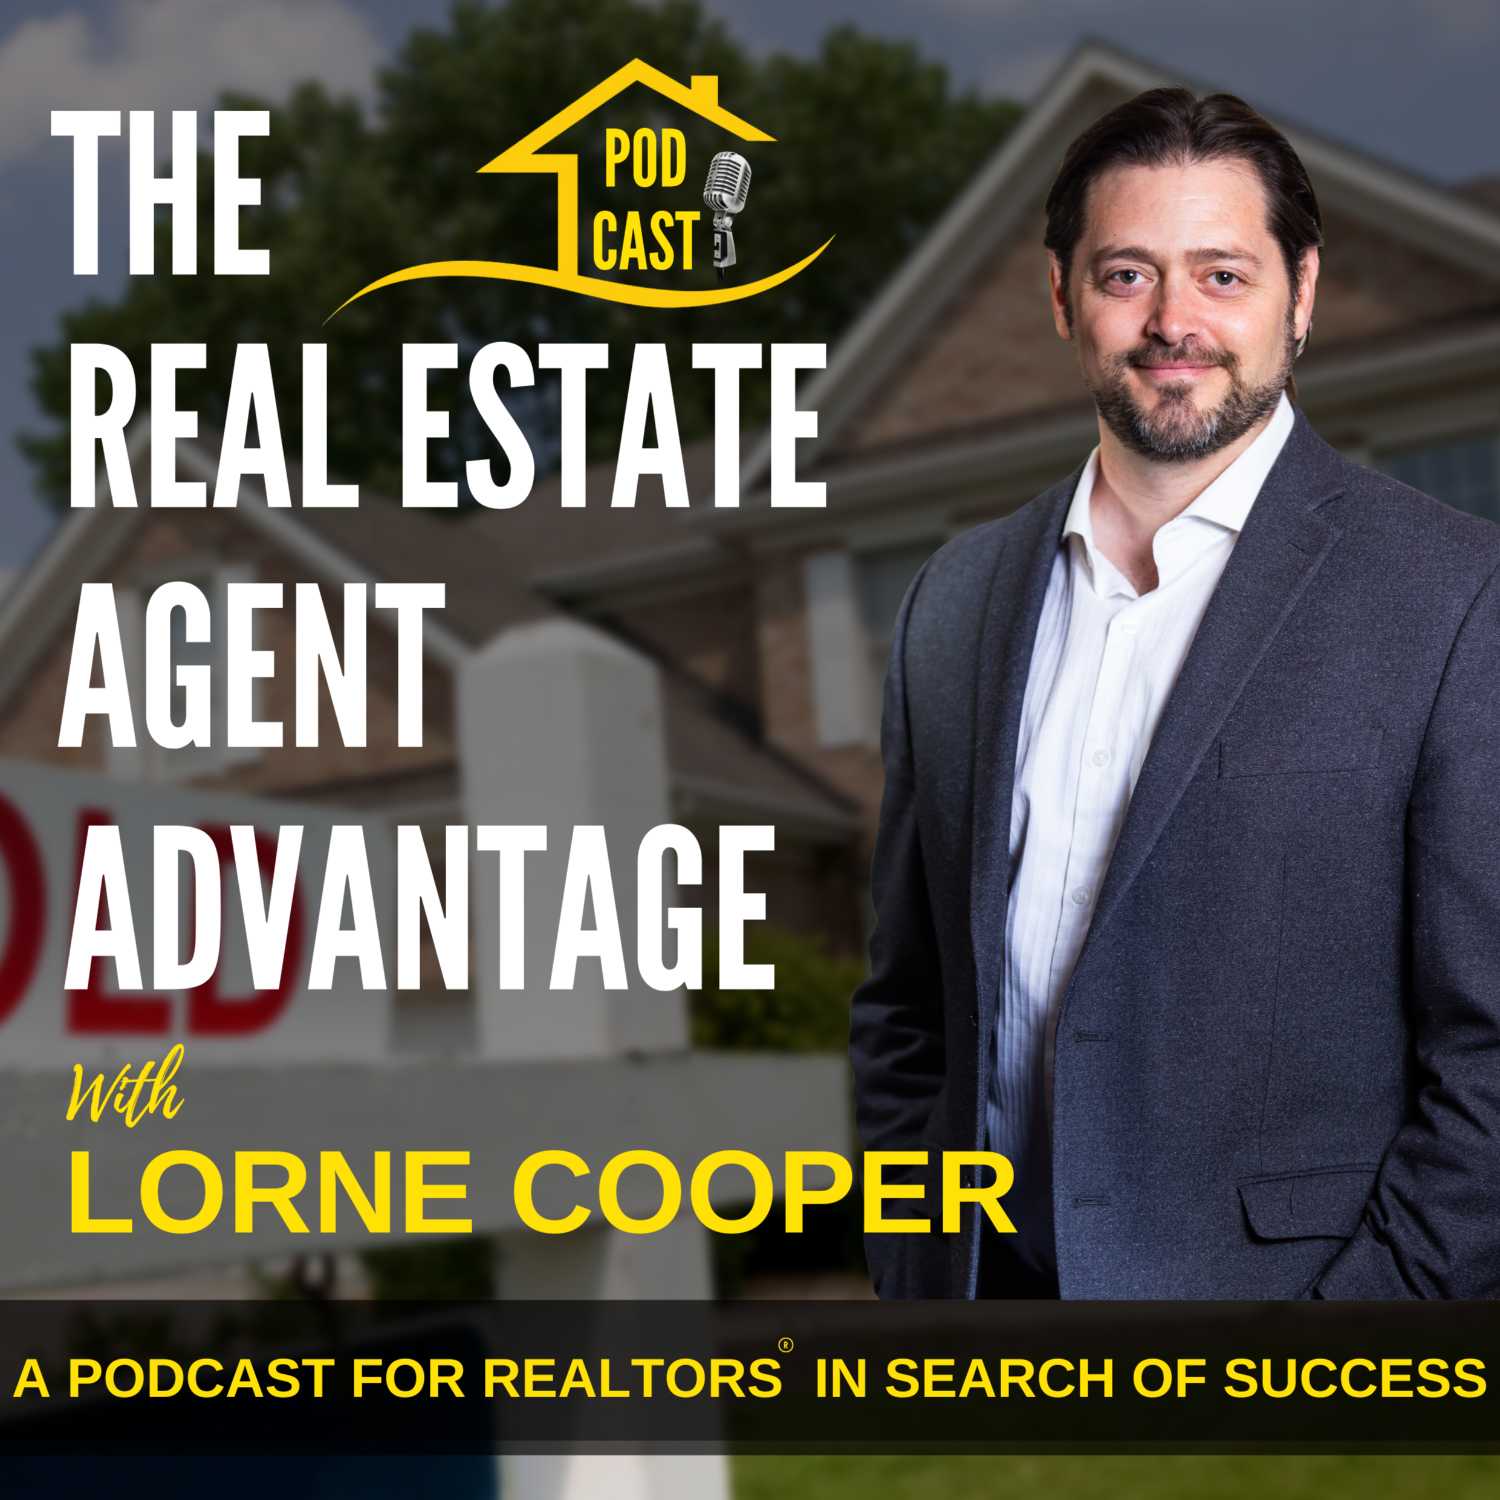 Welcome back Episode. Sorry for the delay!!! Featuring Patrick Keller and His real estate business and podcast.